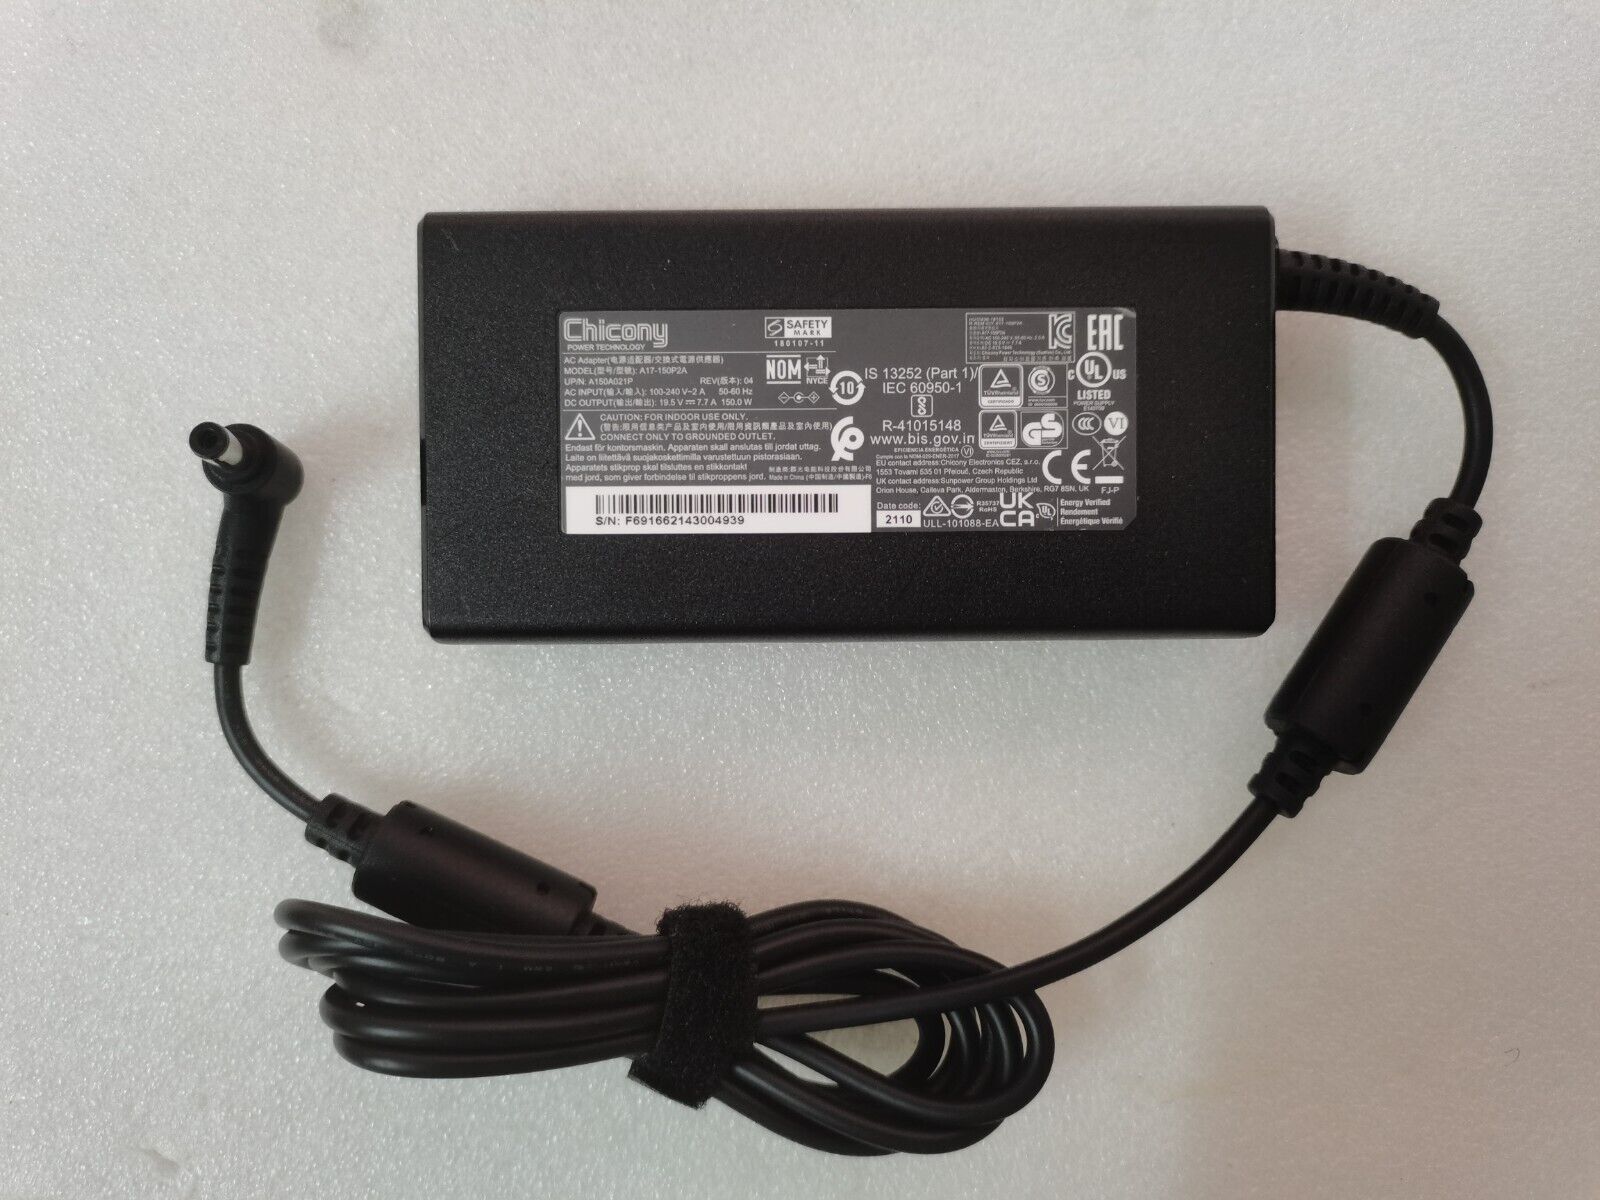 Genuine Chicony 19.5V 7.7A 150W A17-150P2A Charger for GIGABYTE G5 KF5-G3US353SH